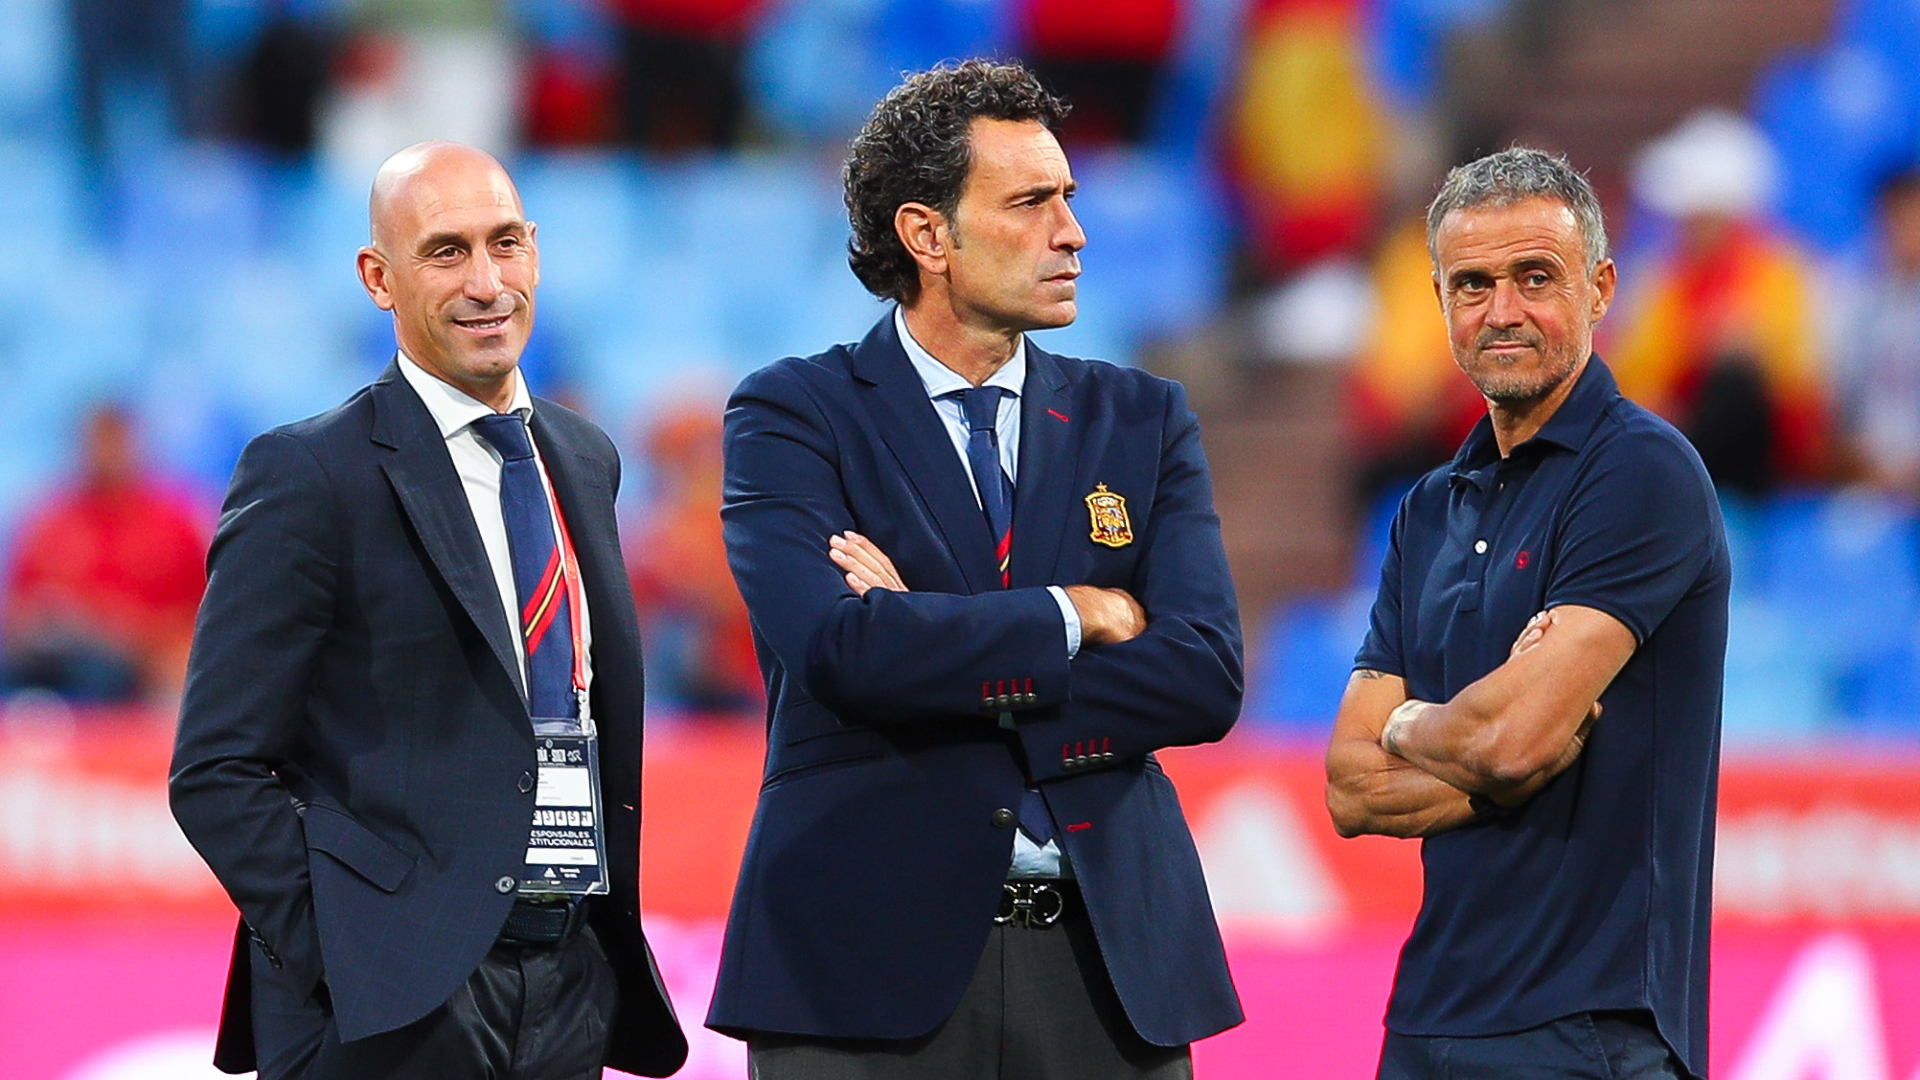 Spain overhaul continues with new sporting director